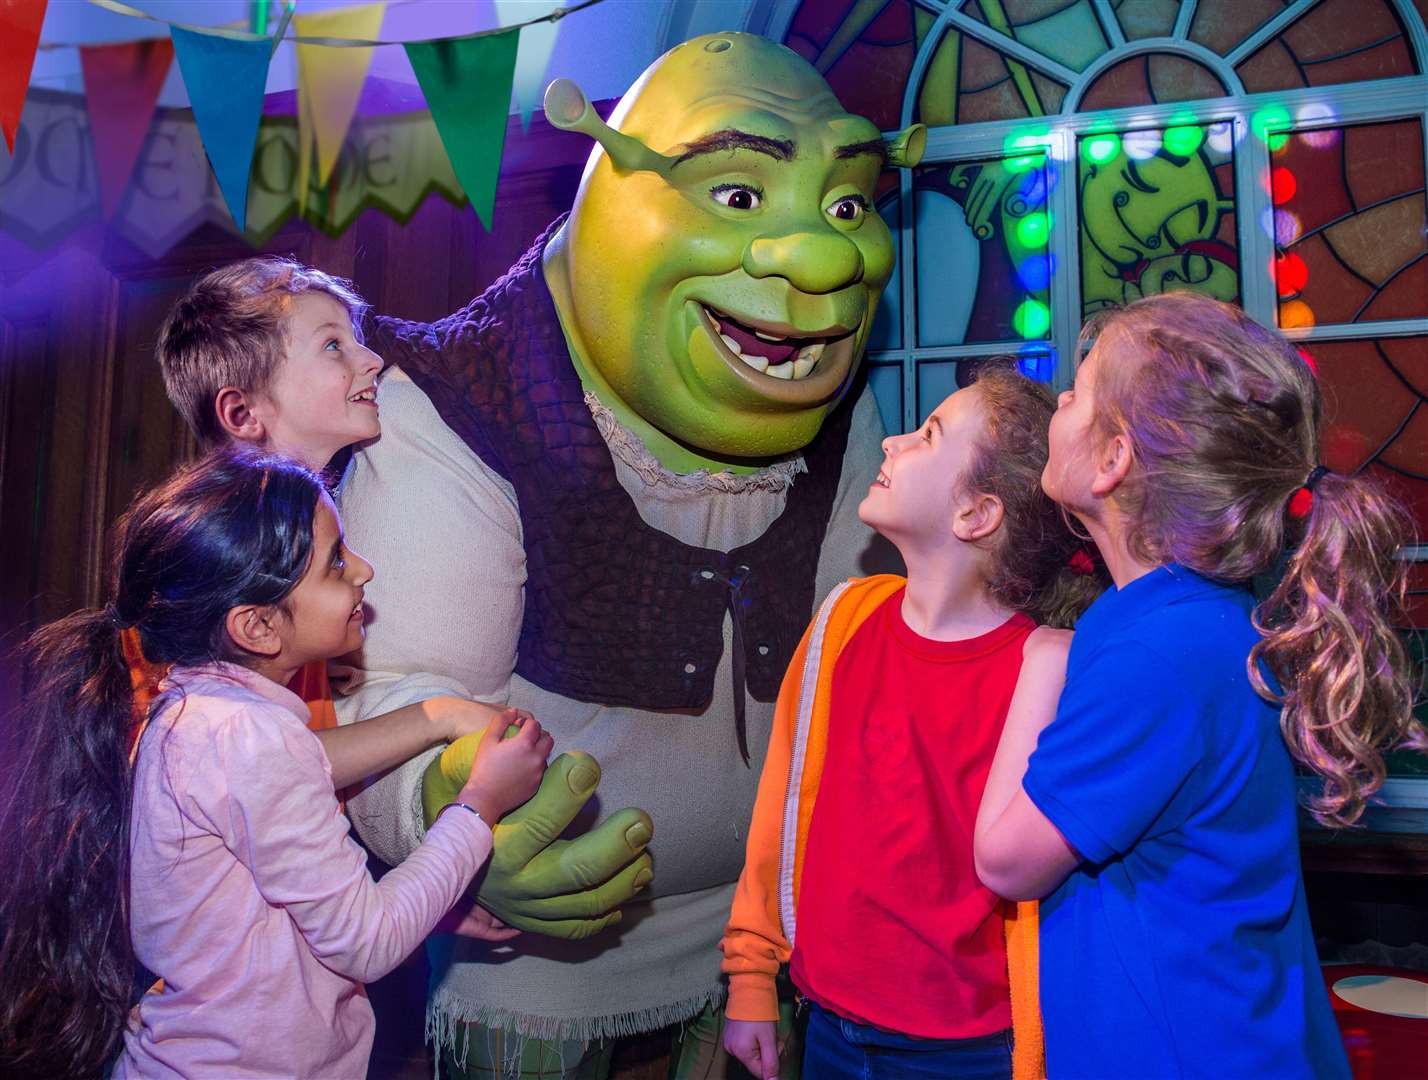 A day out at Shrek's Adventure in London is also part of the offer